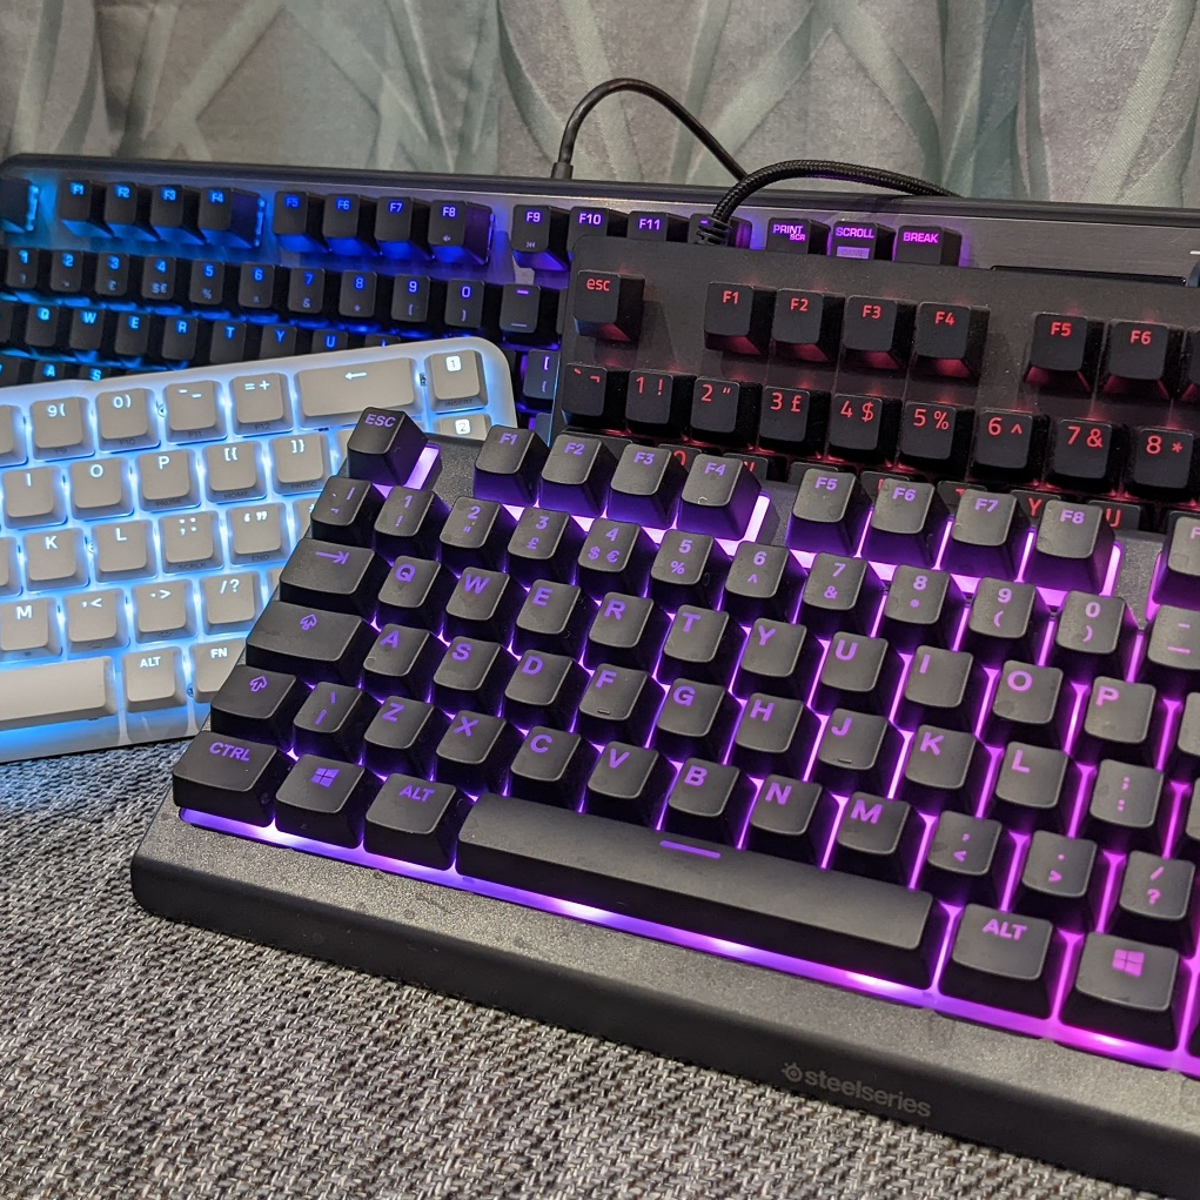 Best gaming keyboard: the top mechanical and wireless keyboards for gaming